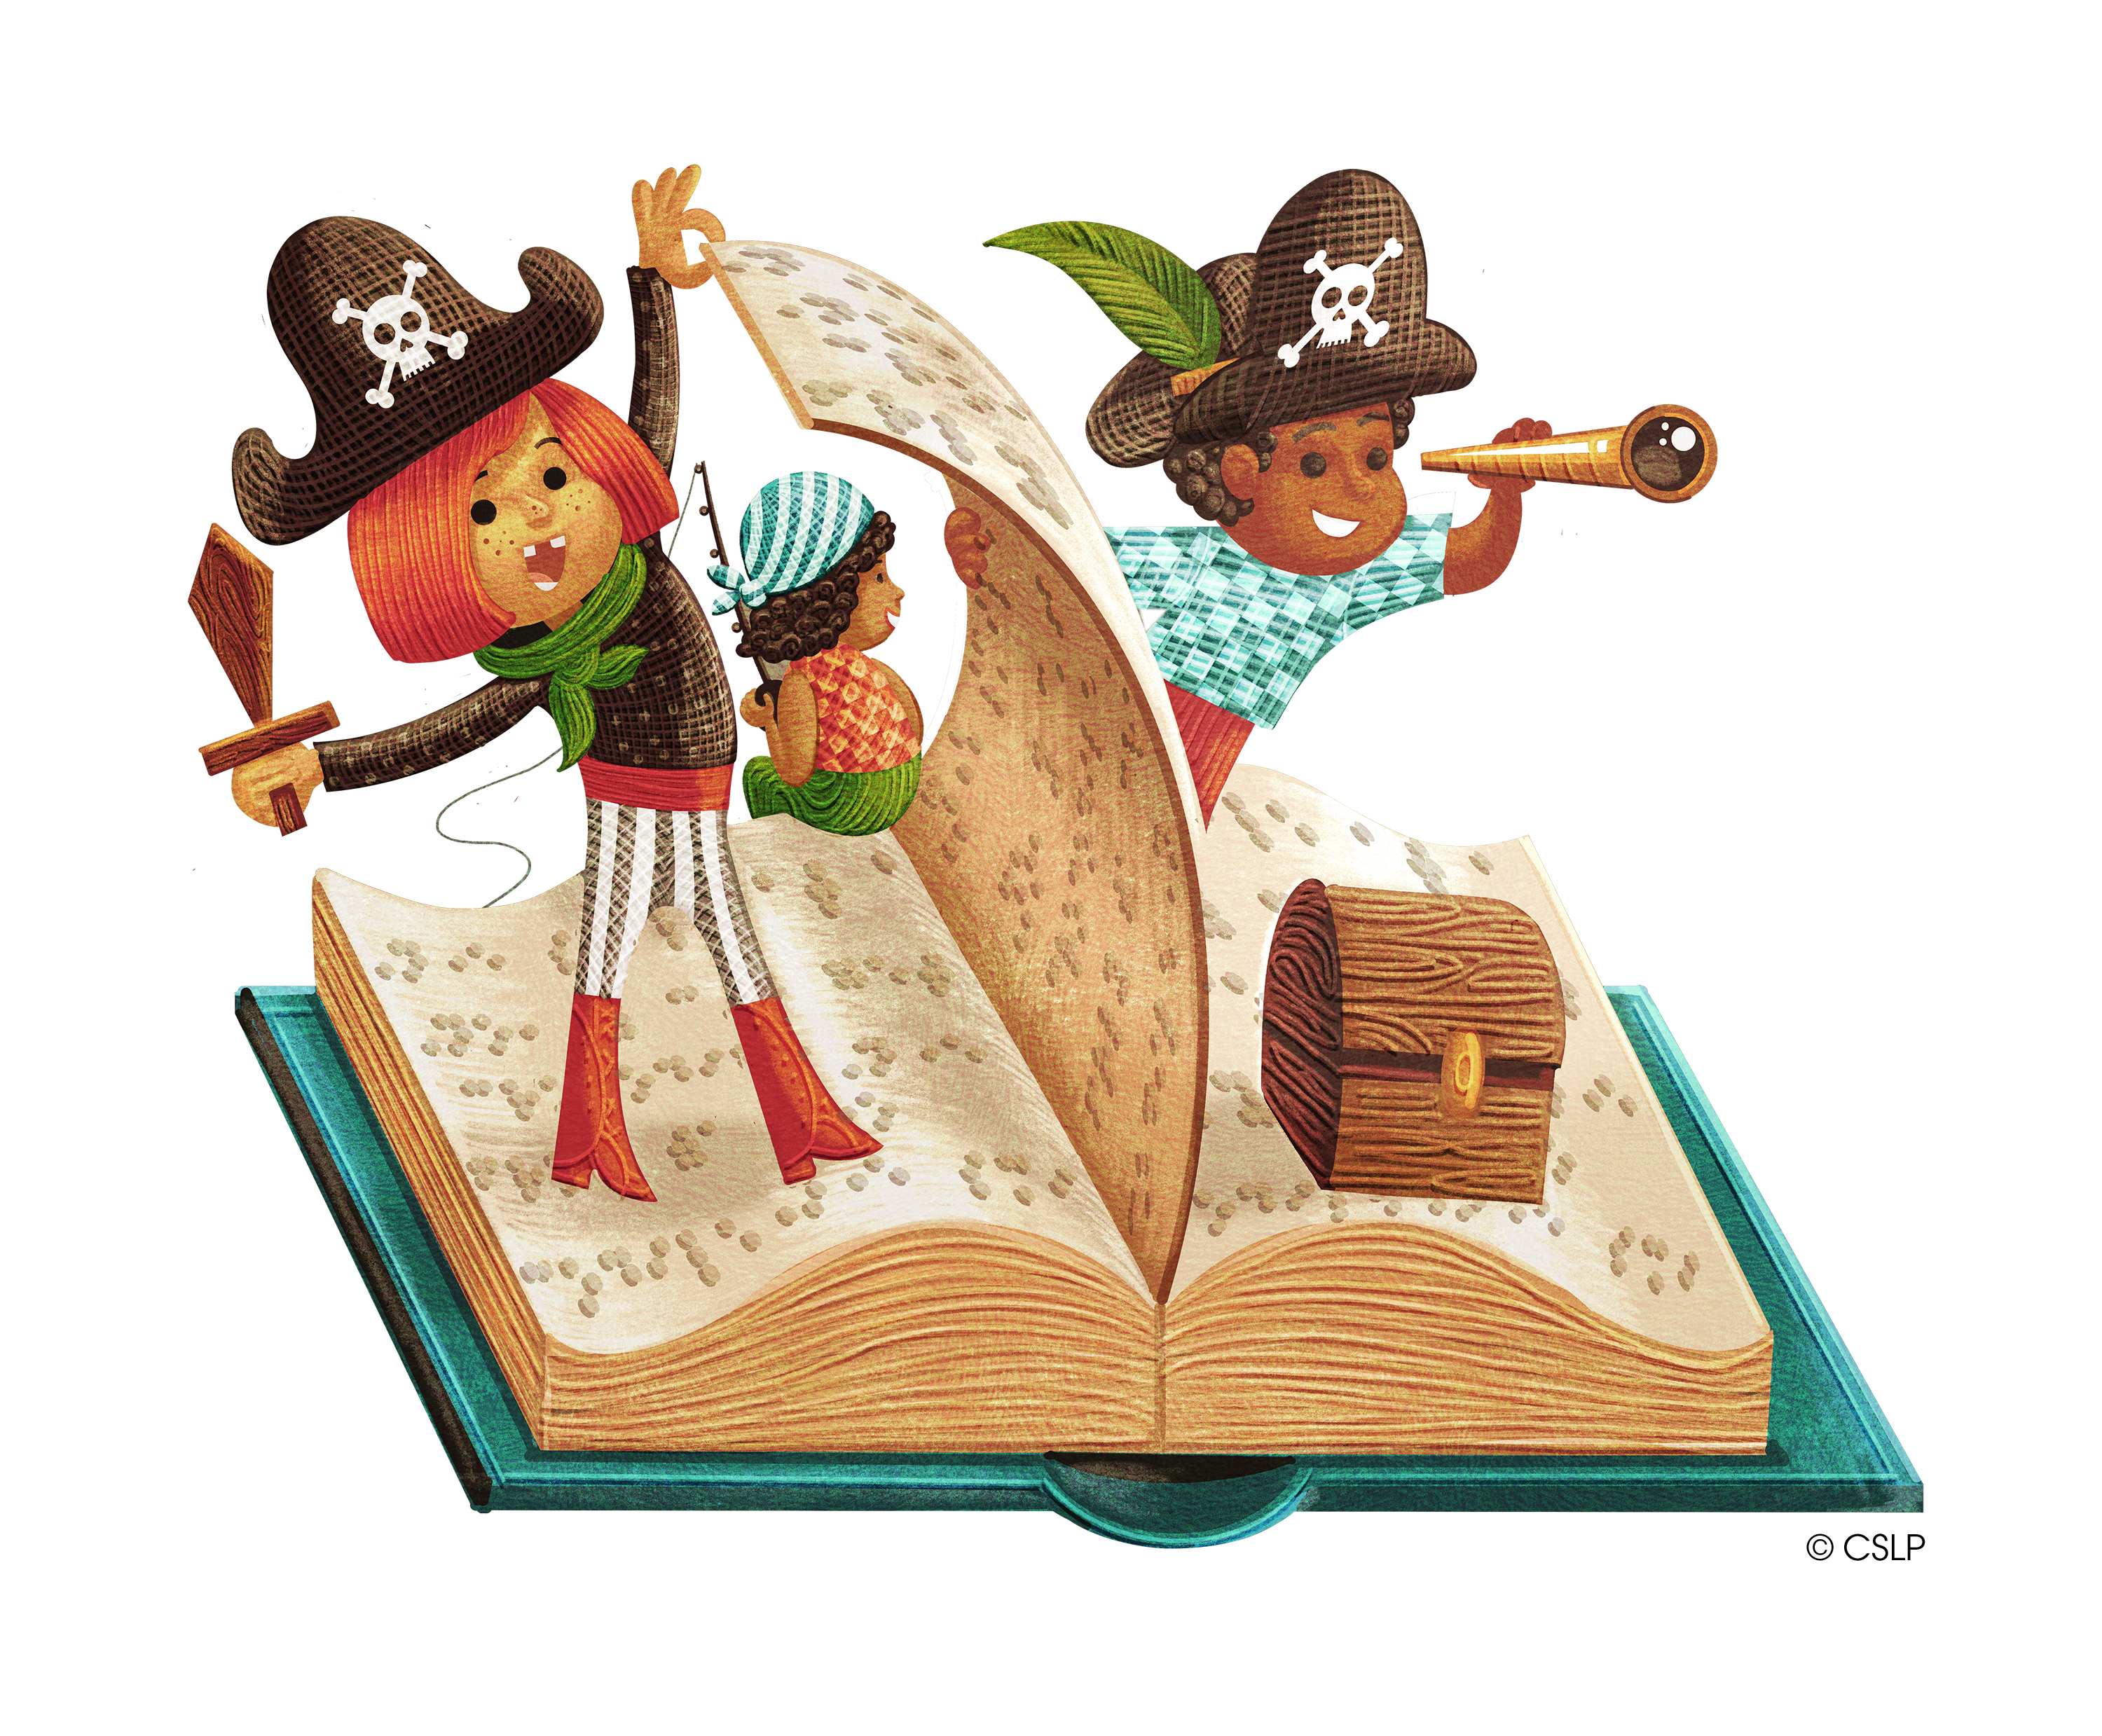 Kids dressed as pirates standing in a large book